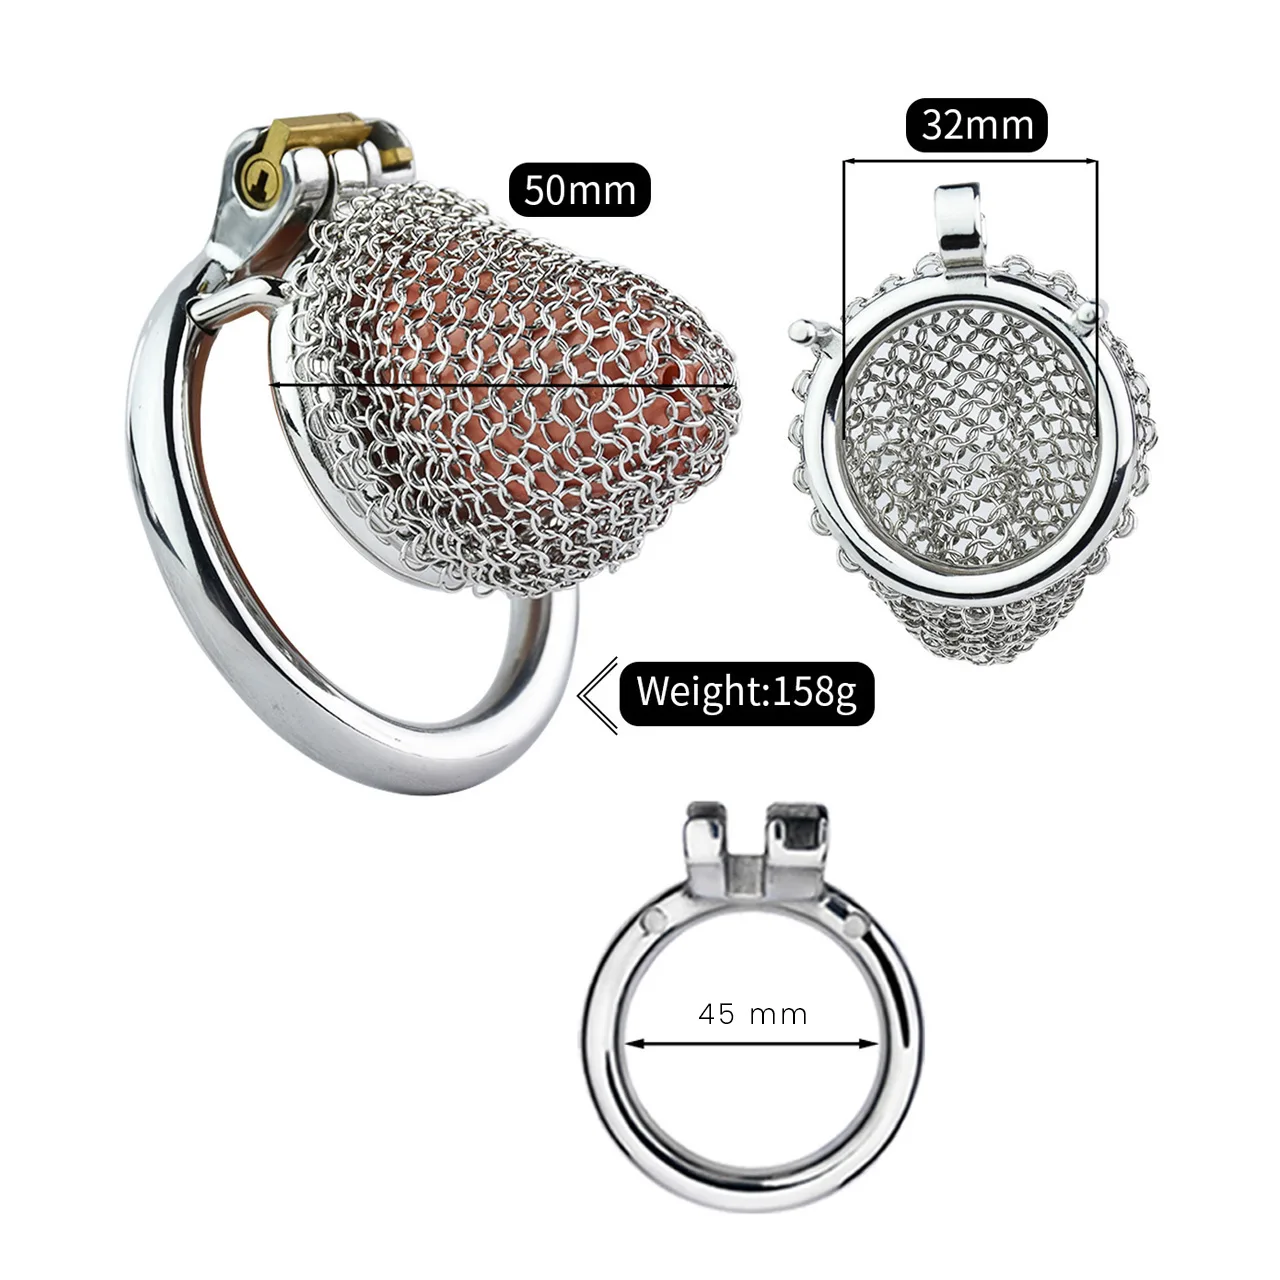 Mesh-Chastity-Cage-S-OPR-278018-5